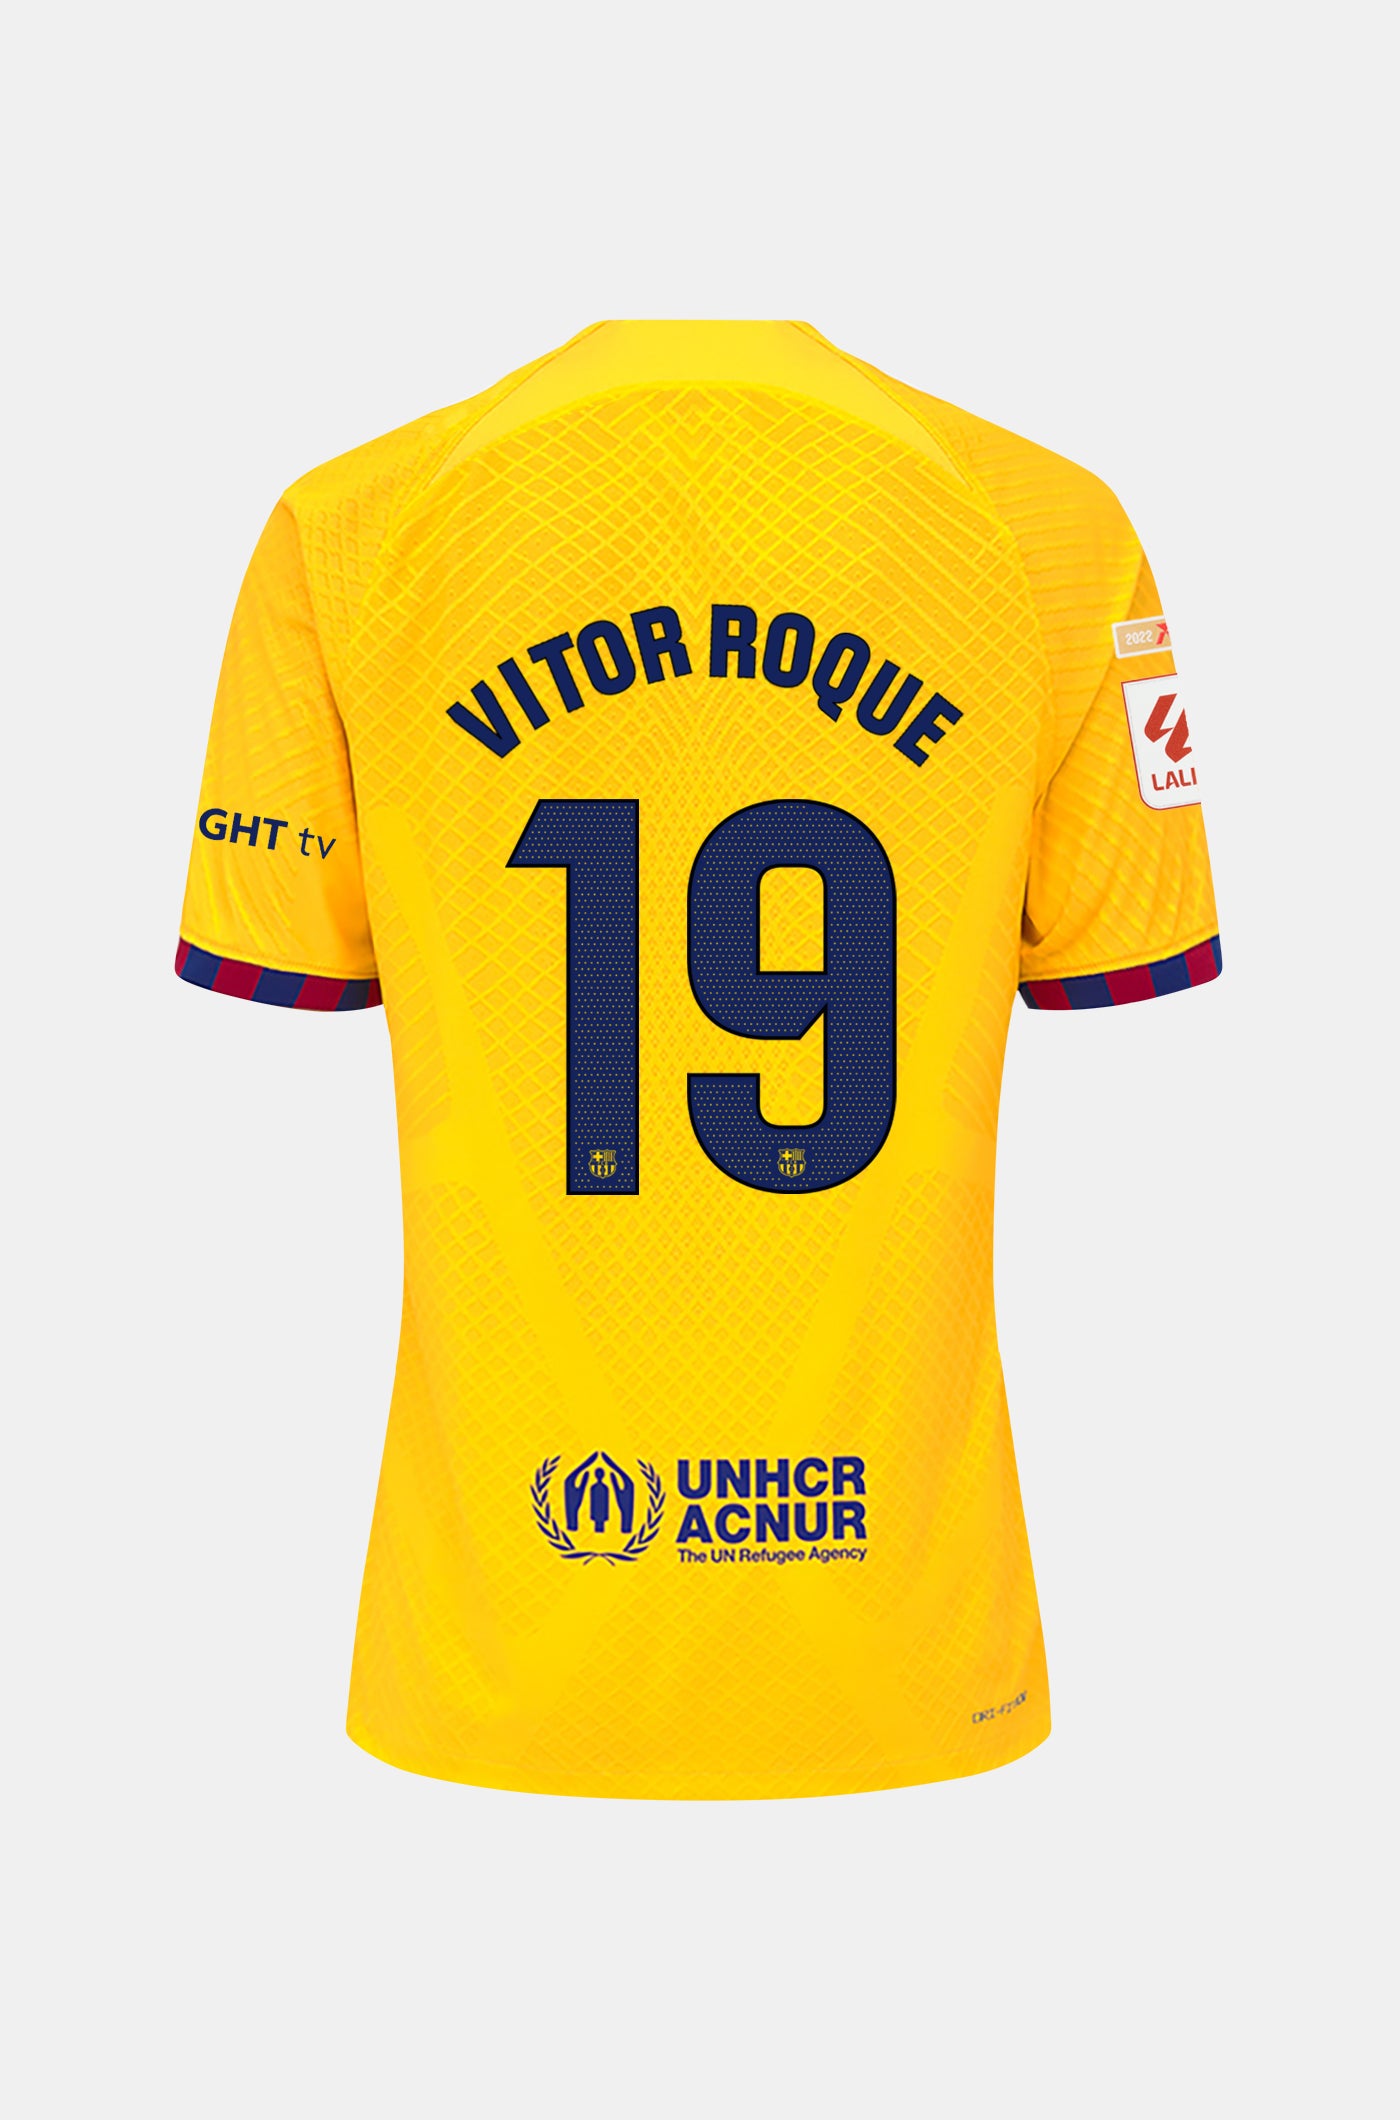 LFP FC Barcelona fourth shirt 23/24 Player’s Edition  - VITOR ROQUE